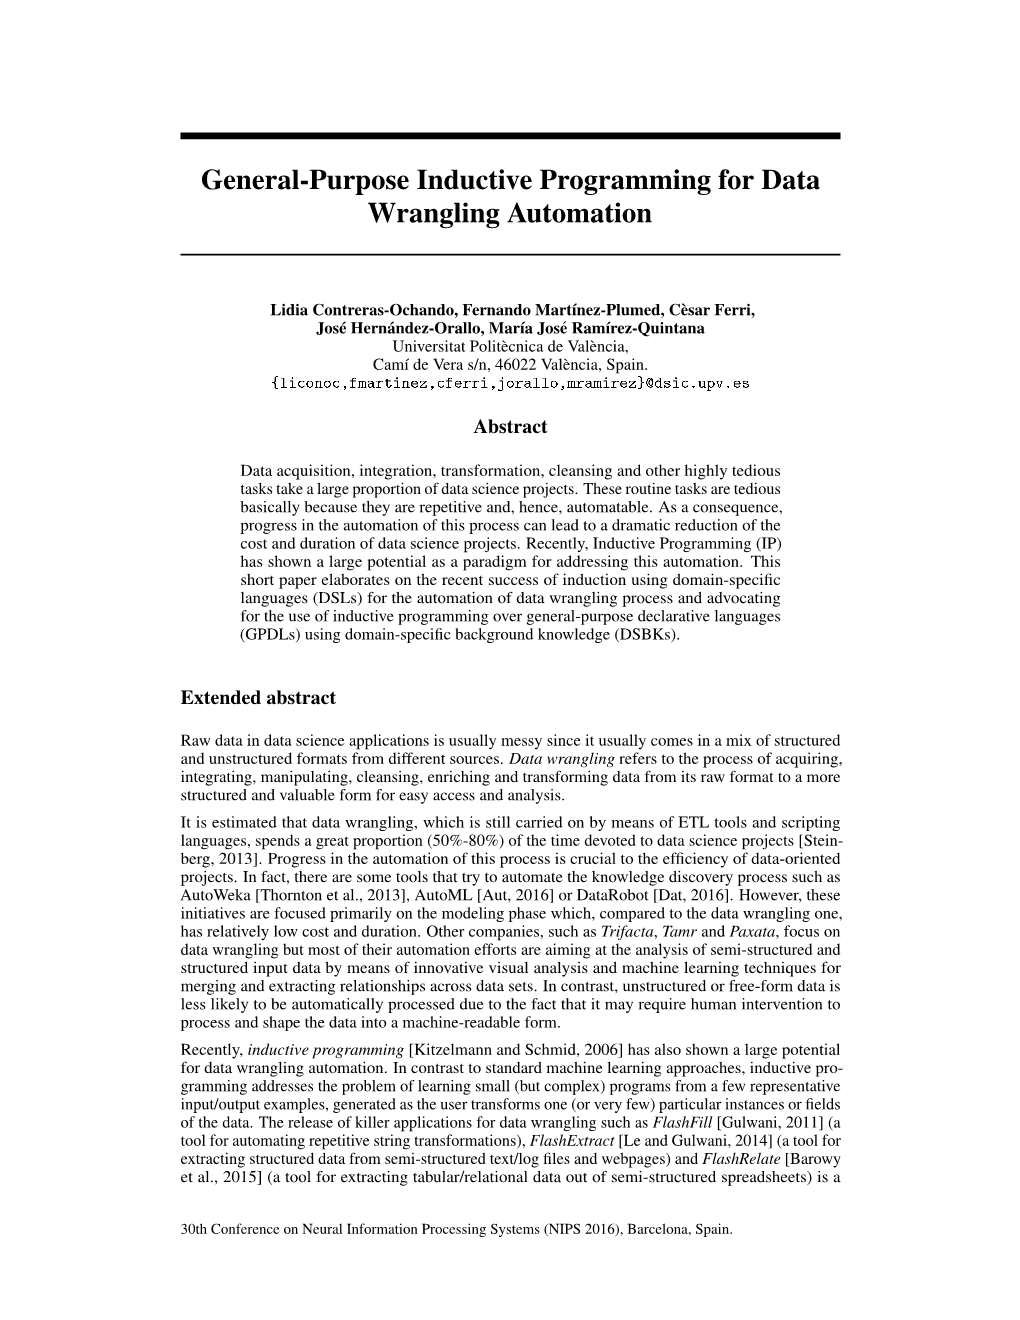 General-Purpose Inductive Programming for Data Wrangling Automation